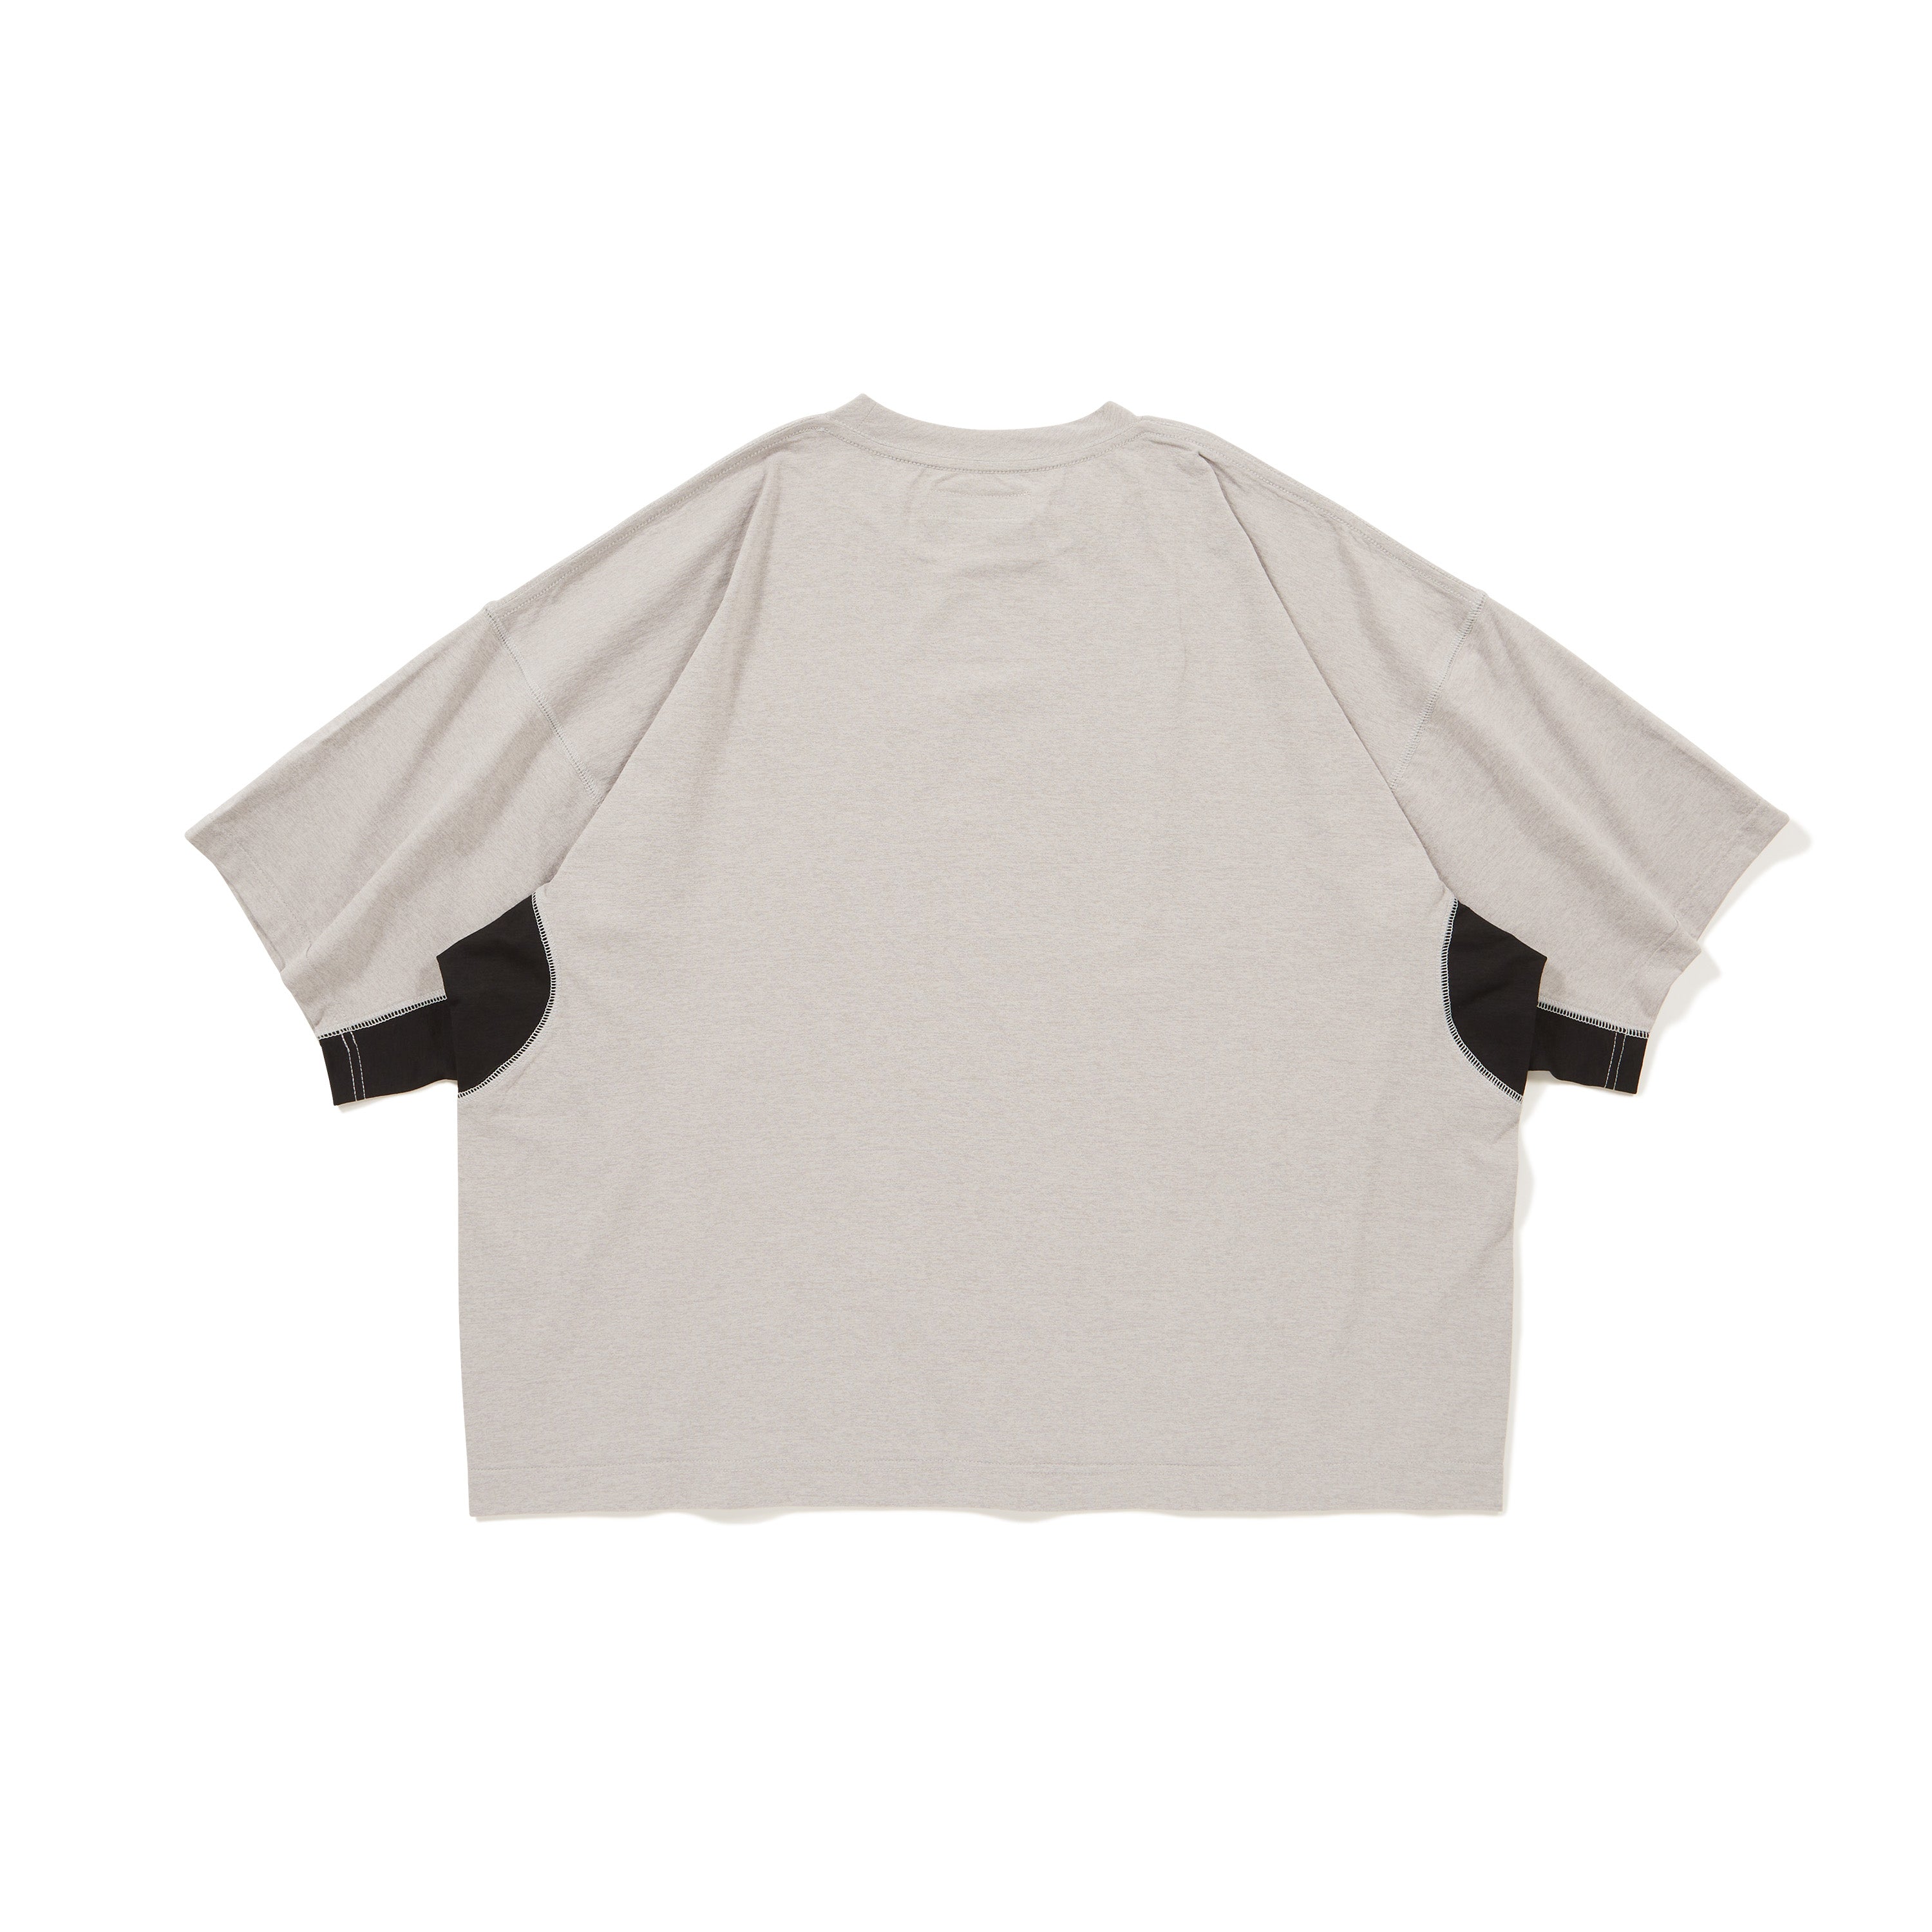 TRANING S/S TOP｜CHARCOAL